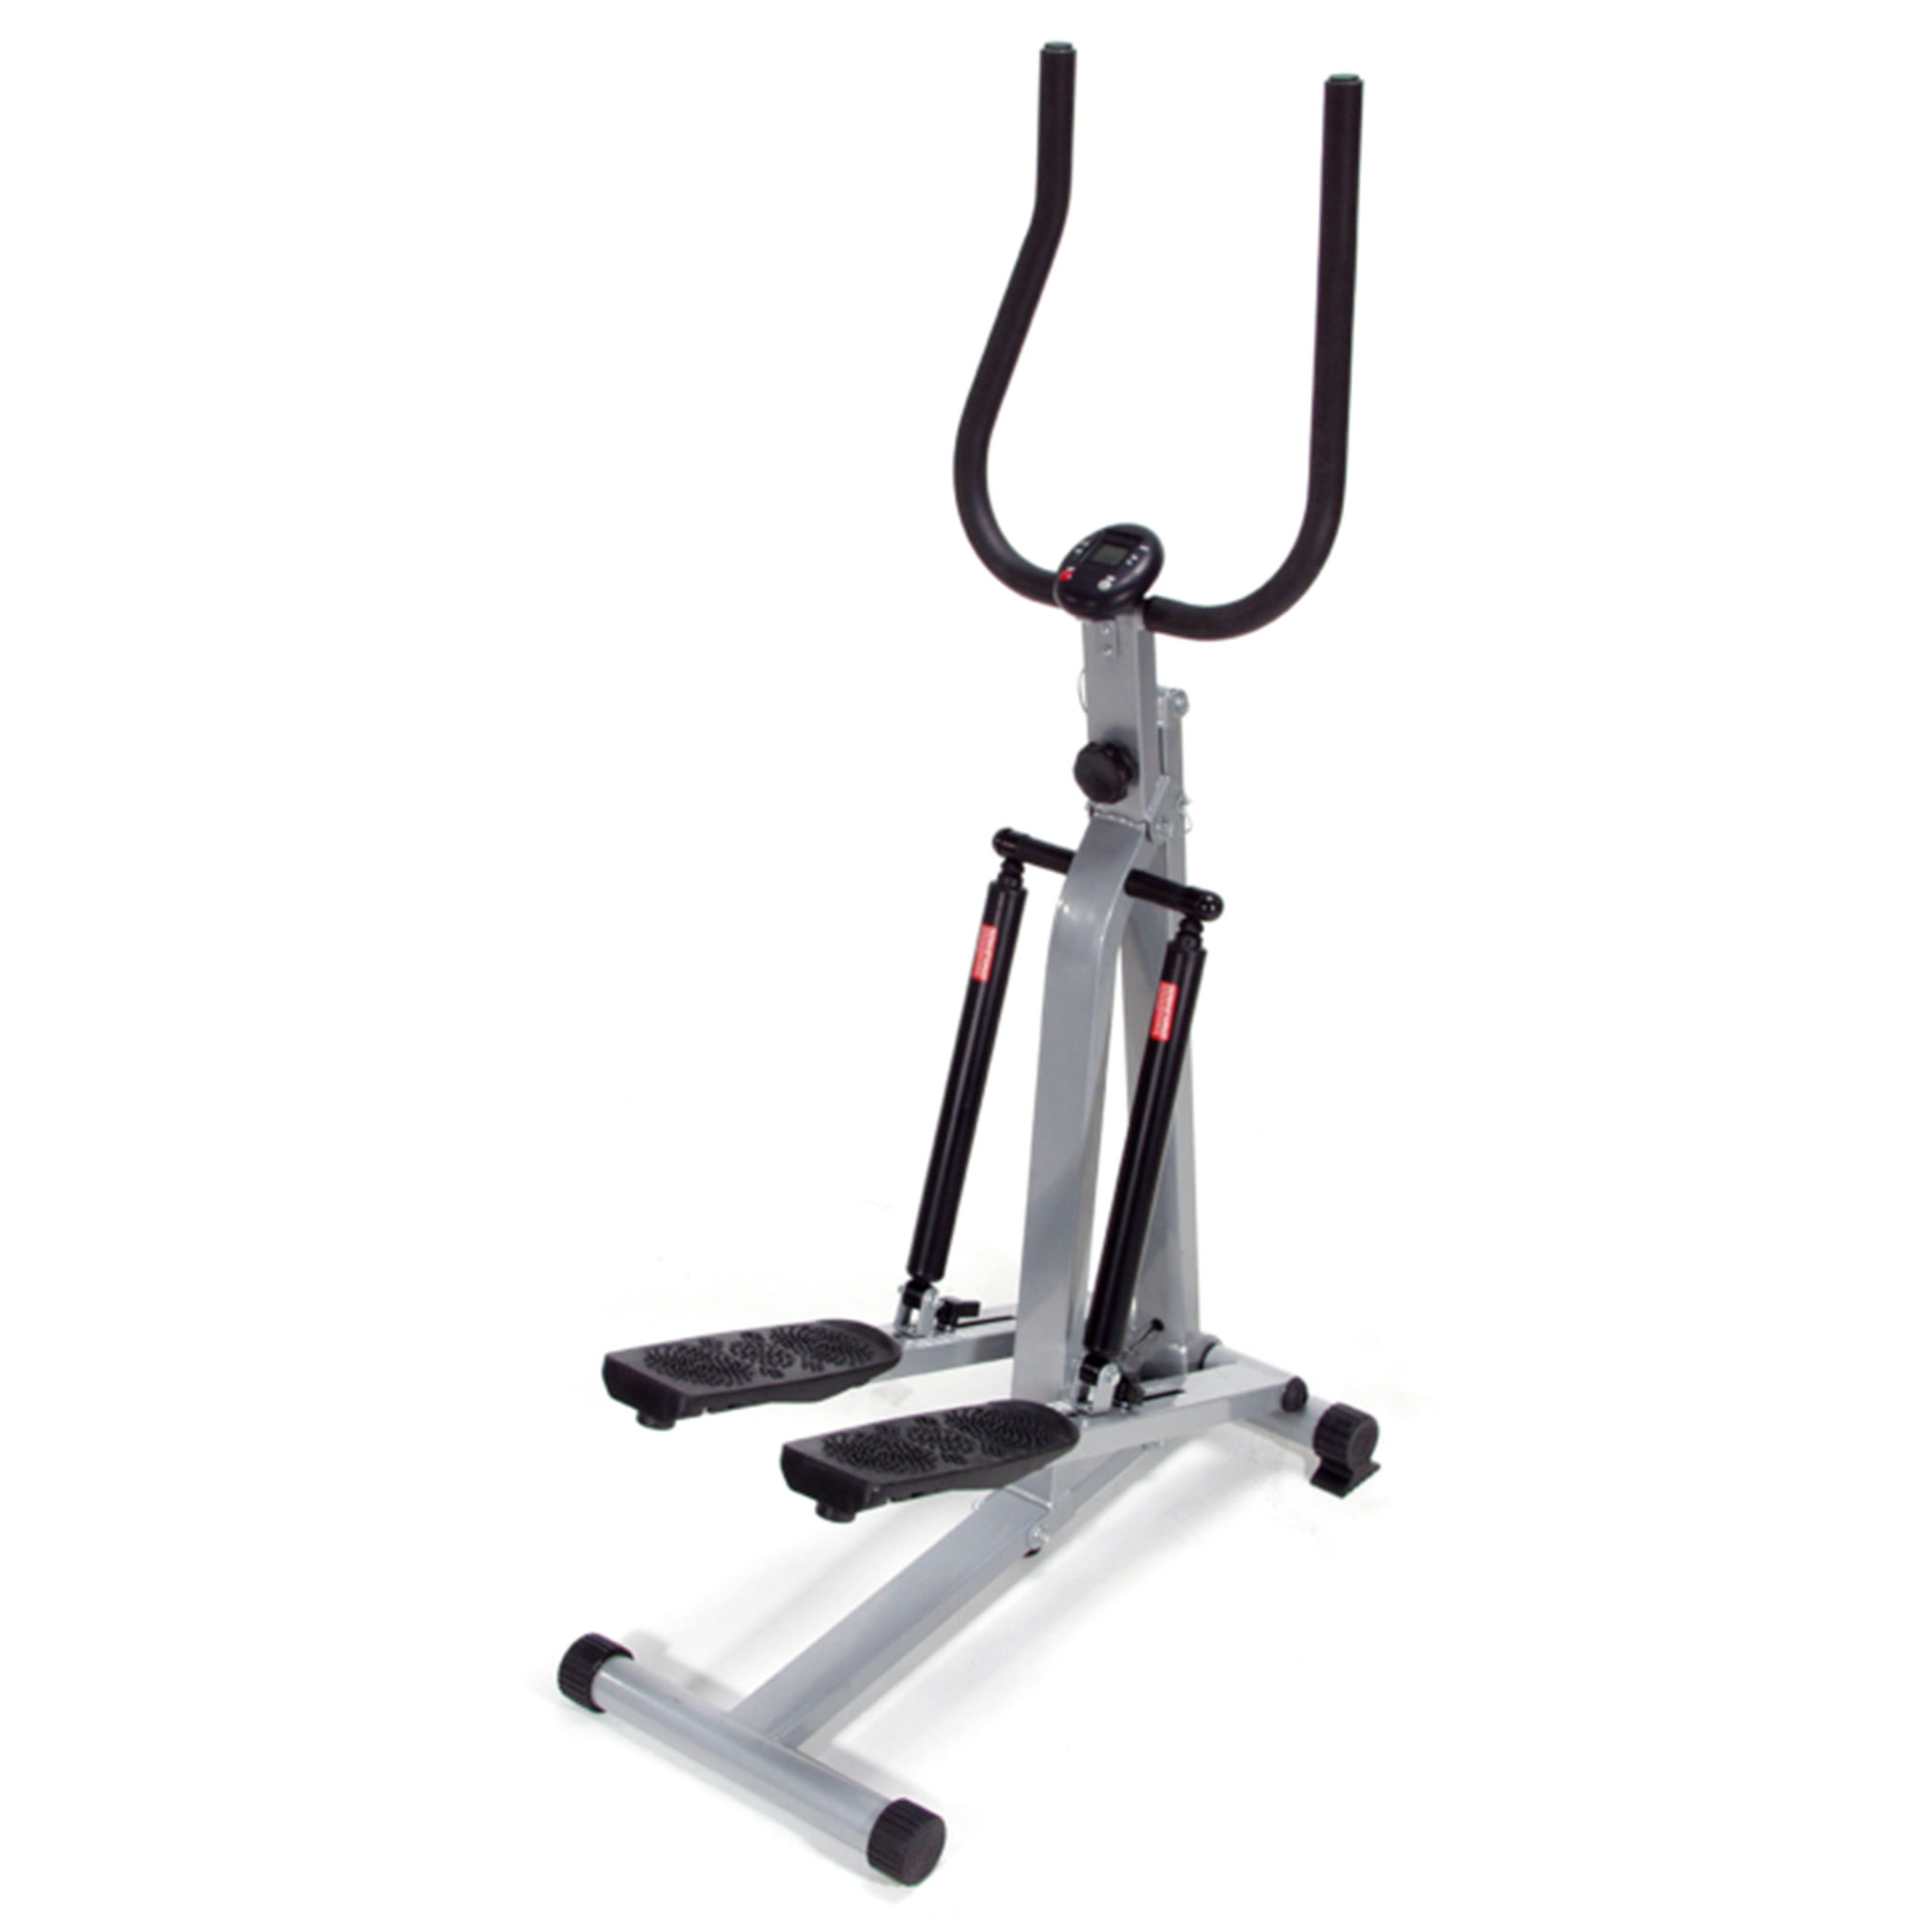 Stamina Products 40-0069 Spacemate Adjustable Folding Fitness Stepper - image 1 of 3